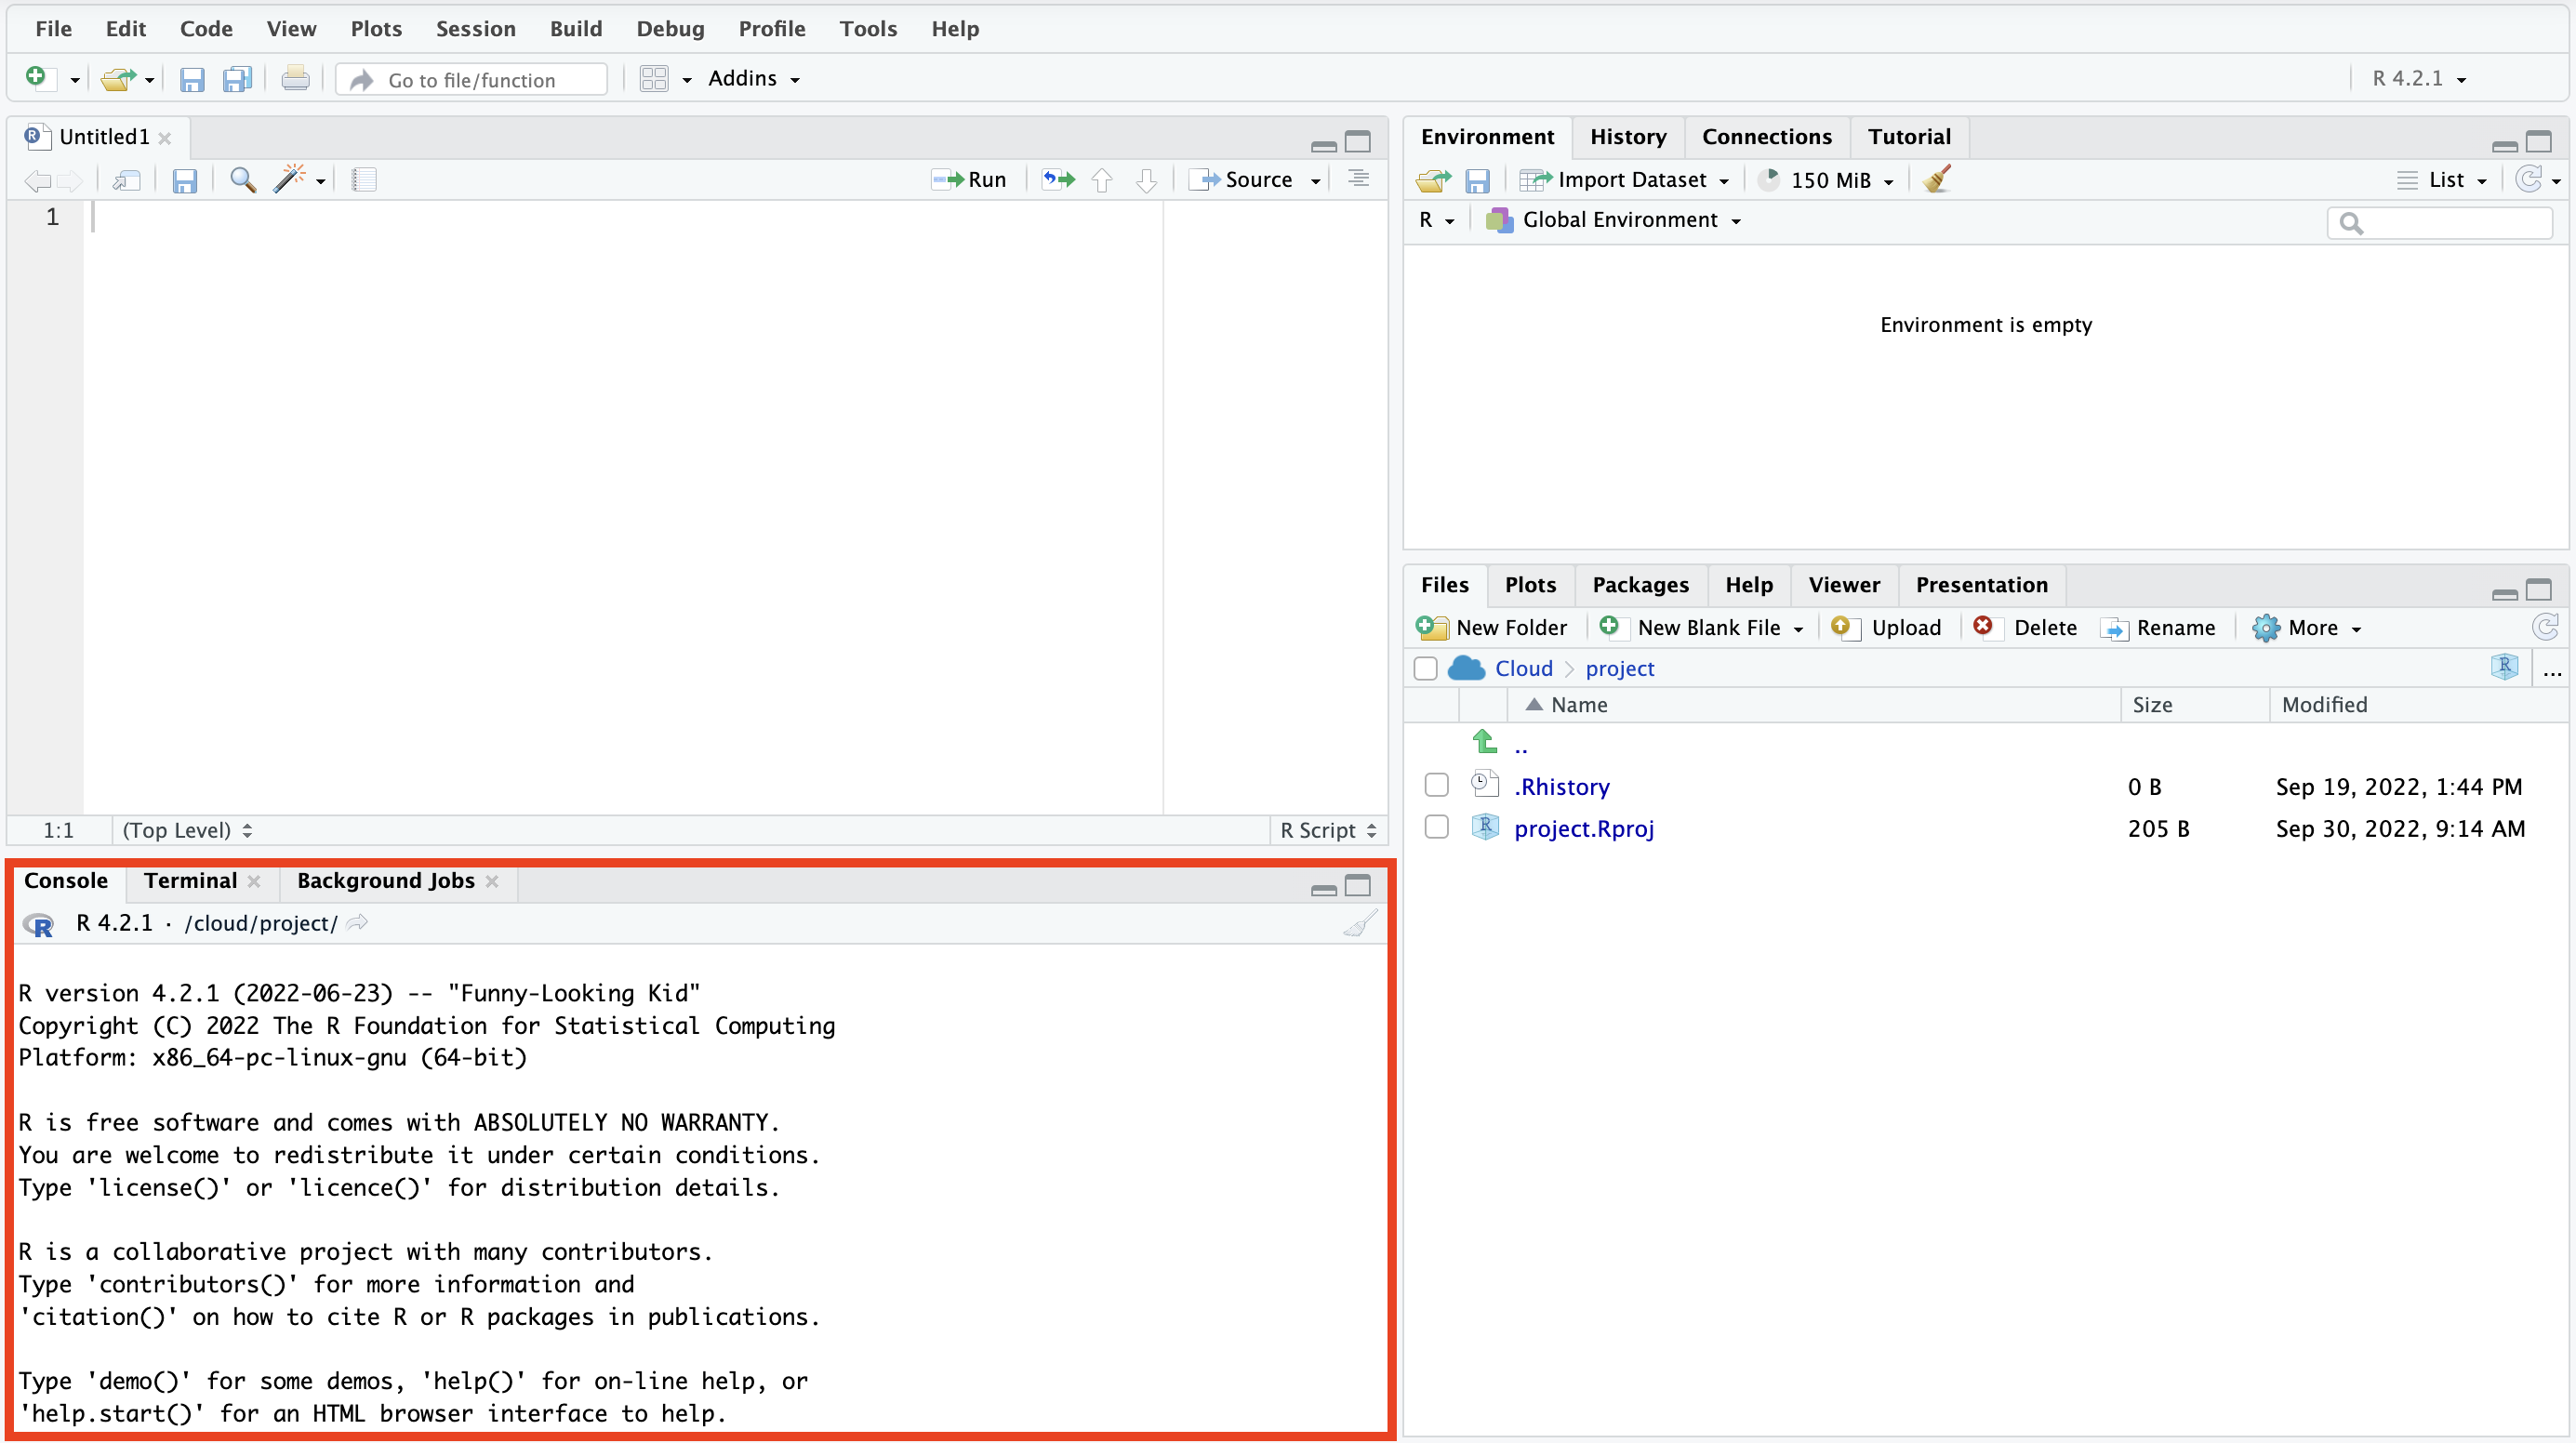 The RStudio interface with the console pane highlighted in red